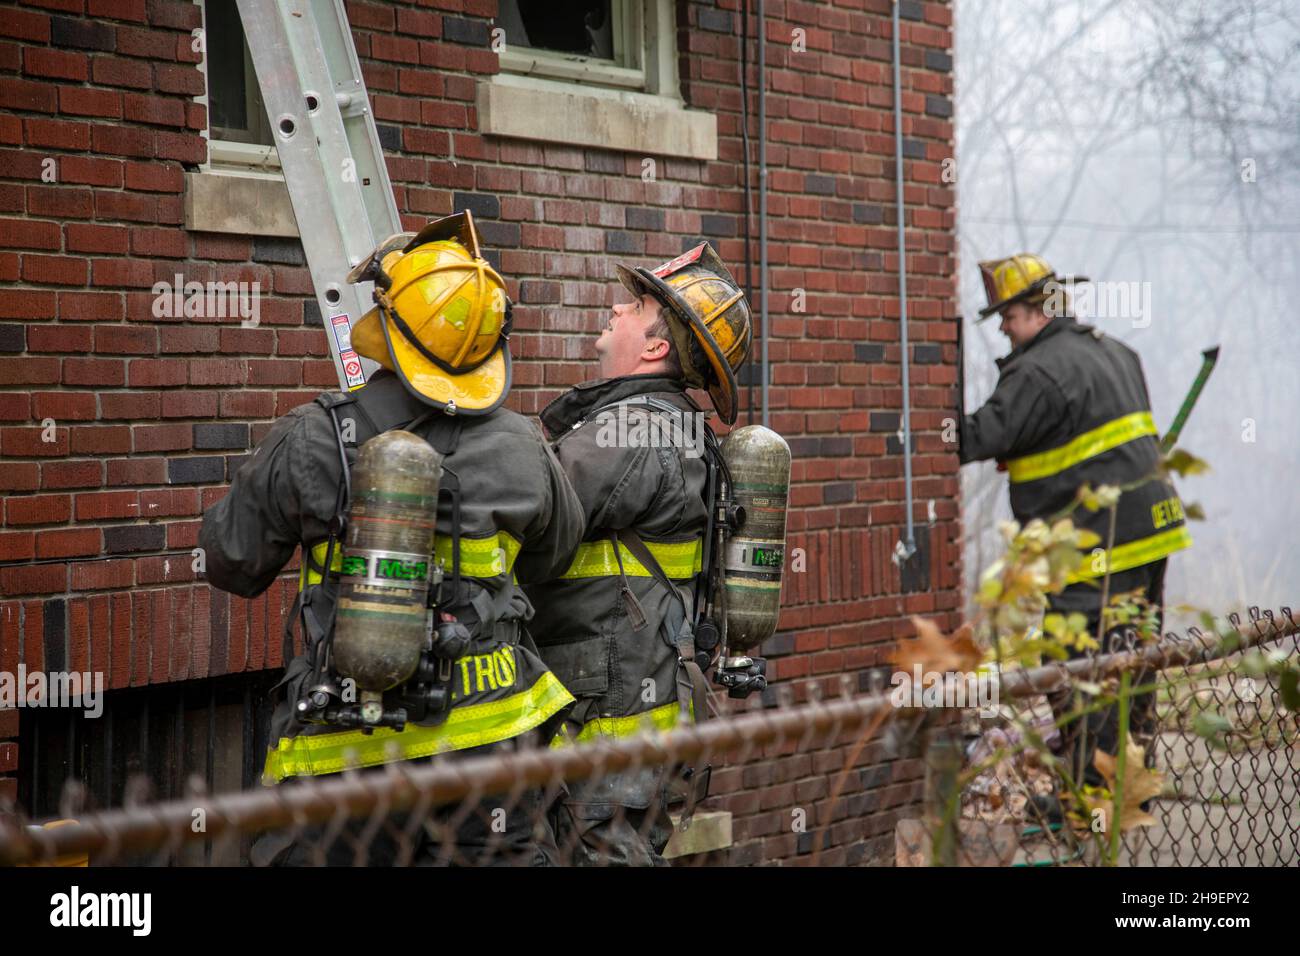 Detroit, Michigan - Wearing air tanks, firefighters set up a ladder as they battle a fire which damaged a home in Detroit's Morningside neighborhood. Stock Photo